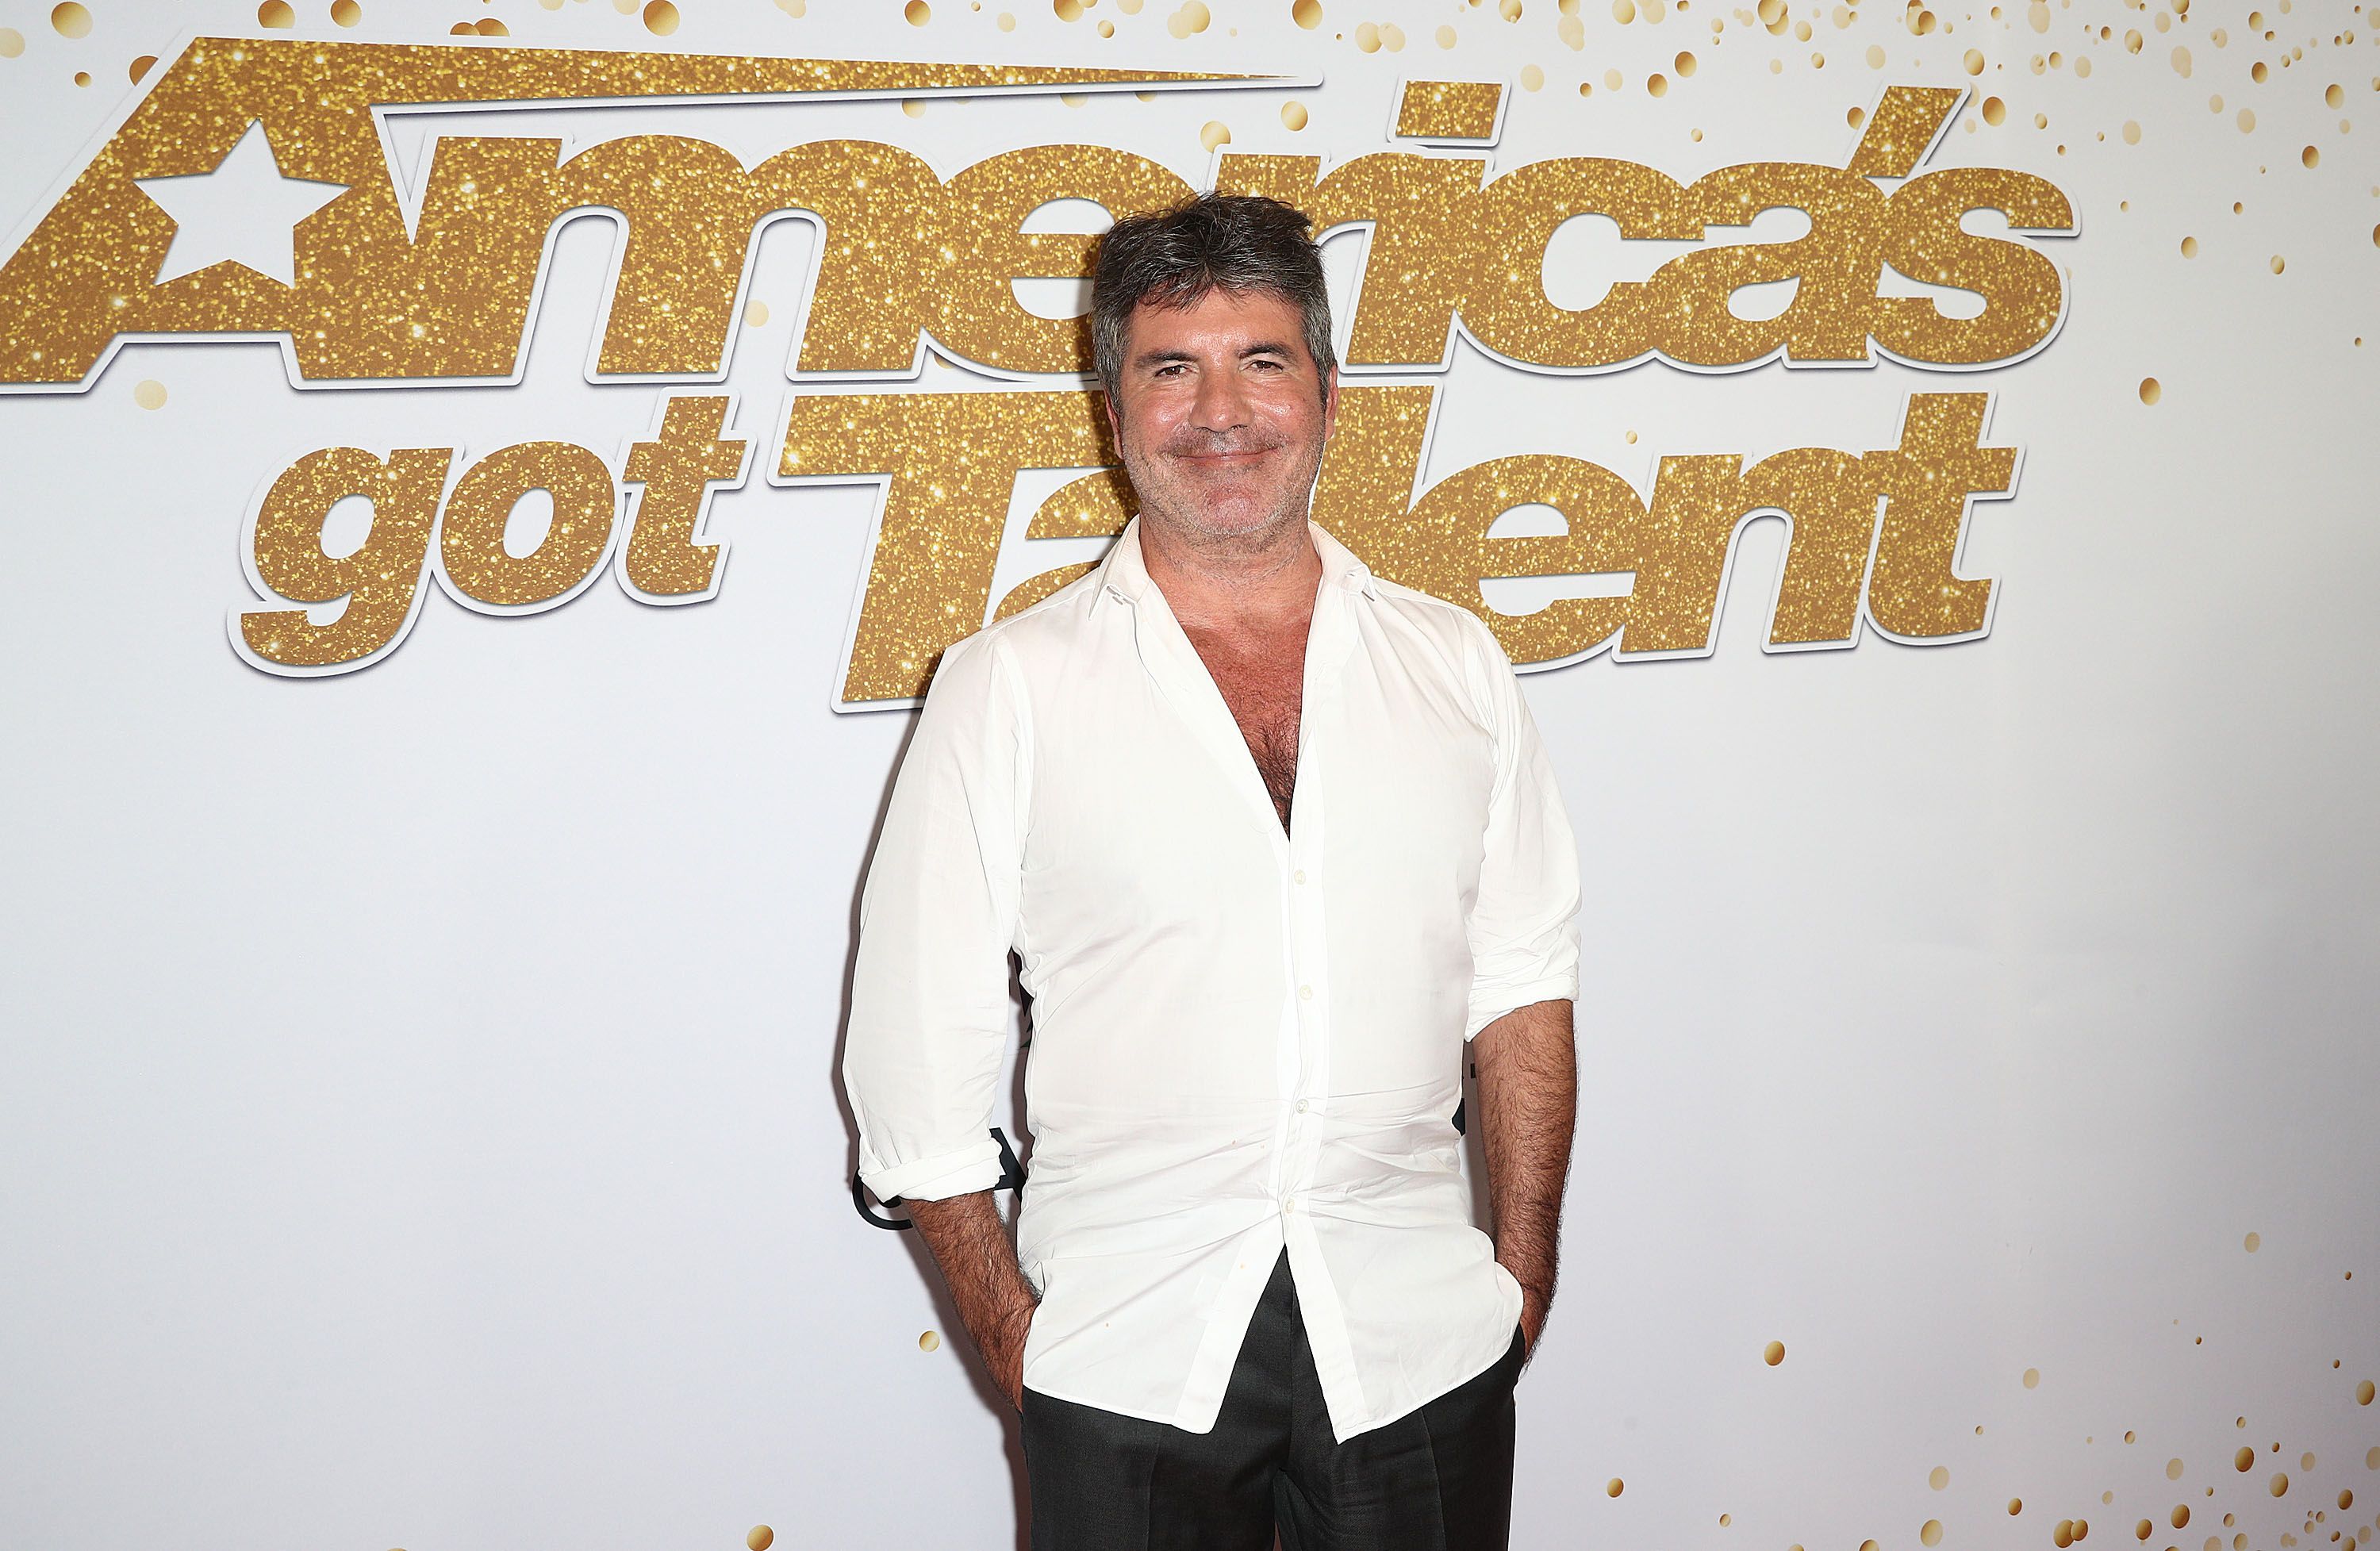 Simon Cowell at "America's Got Talent" Season 13 Finale Live Show Red Carpet at the Dolby Theatre on September 19, 2018 | Photo: Getty Images